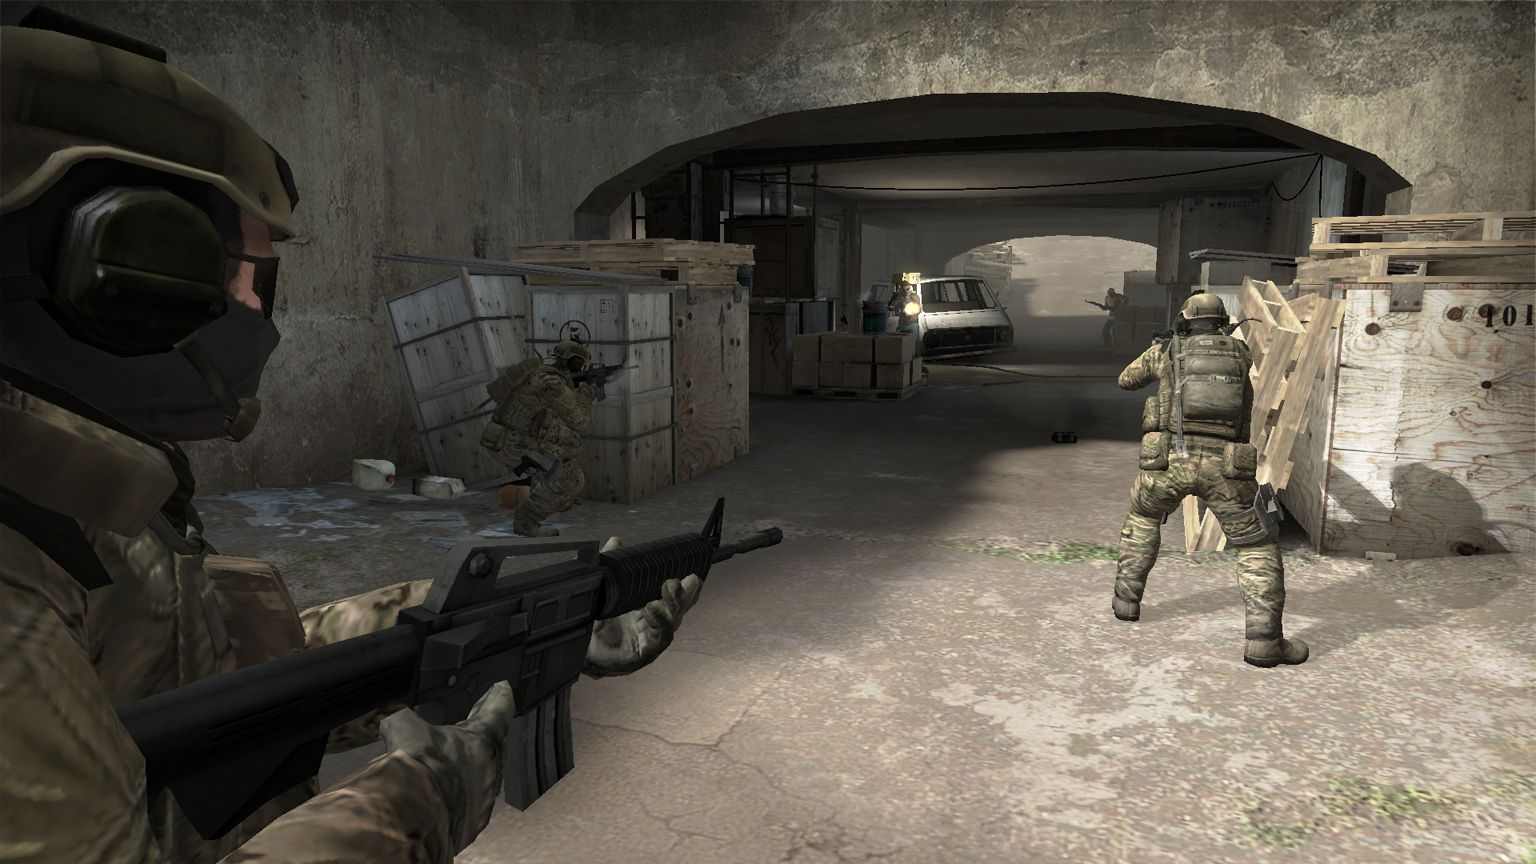 download free counter strike play